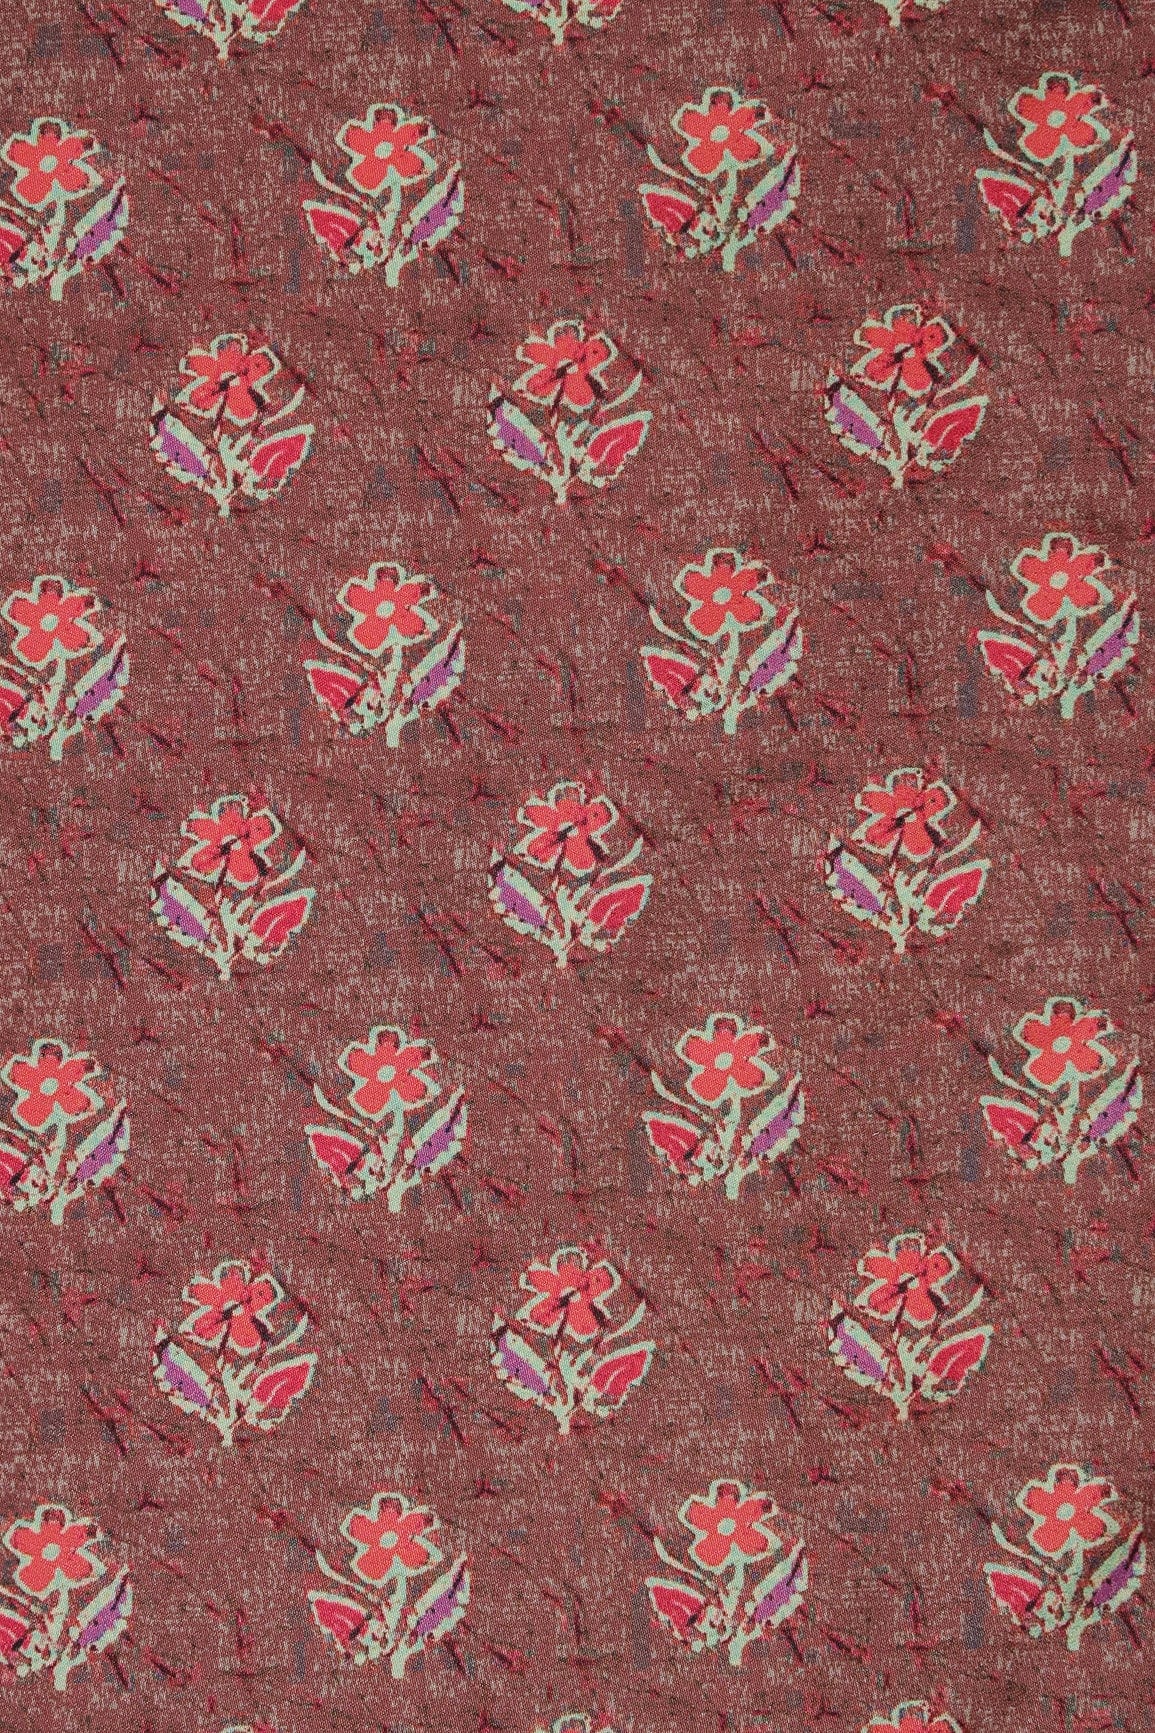 doeraa Prints Peach And Pink Floral Pattern Digital Print On Brown French Crepe Fabric